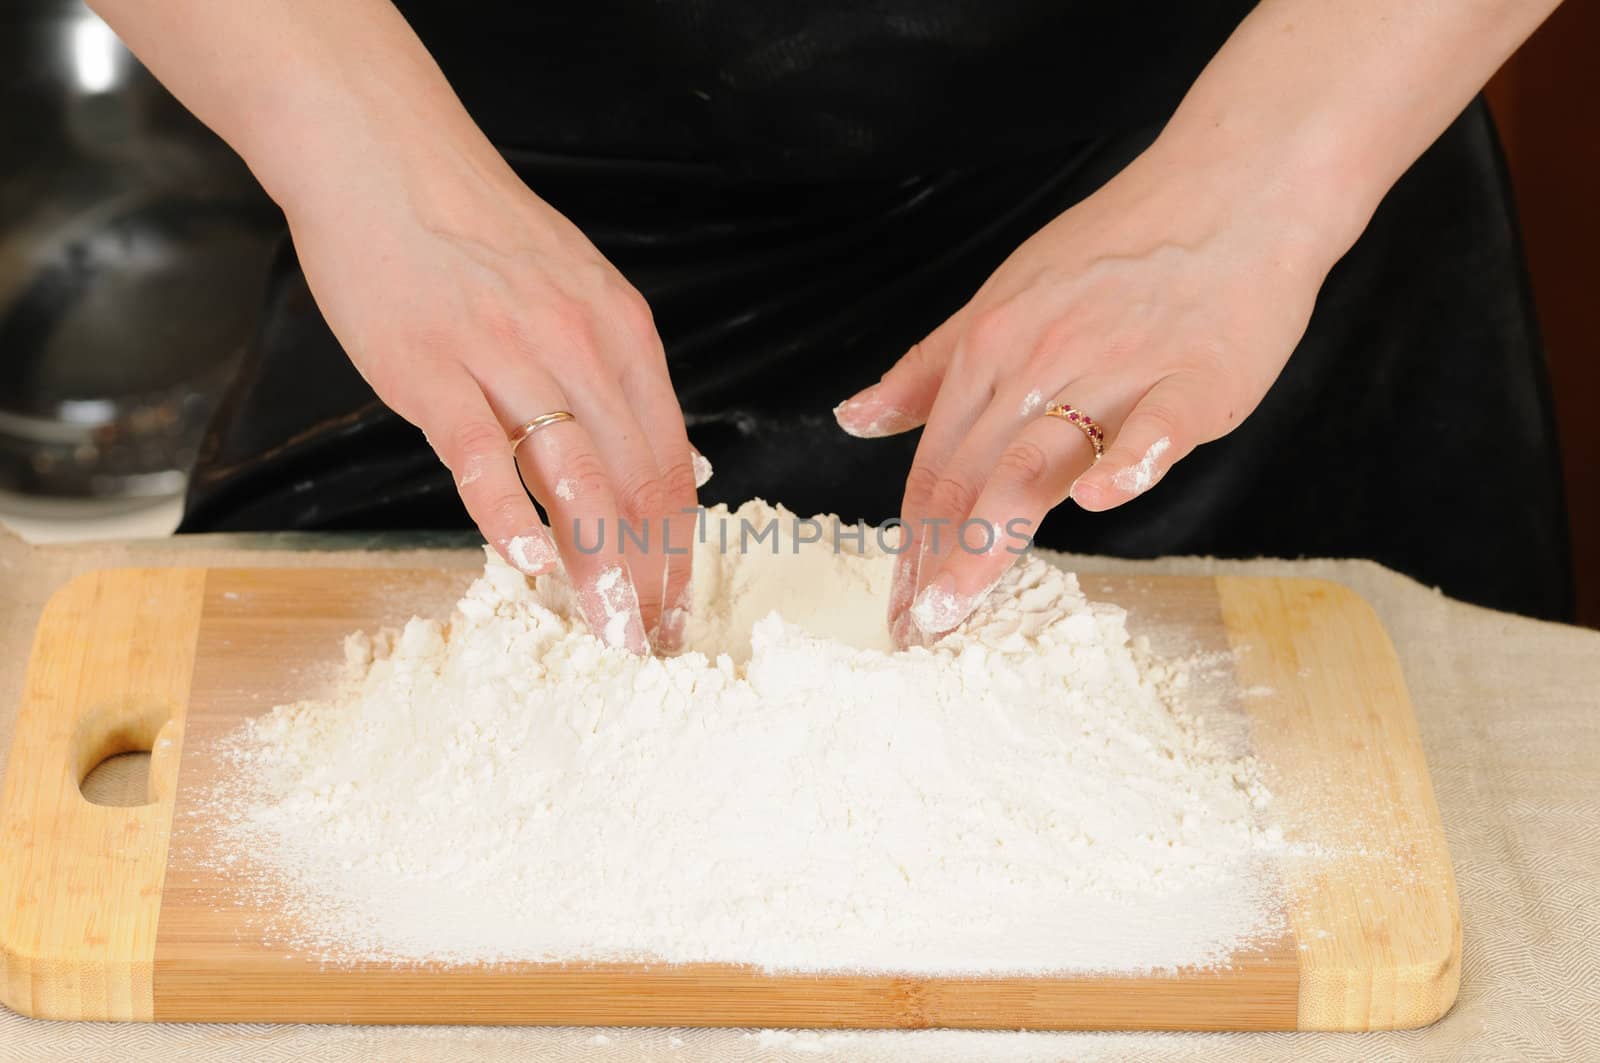 Preparation of the test for a baking of rolls